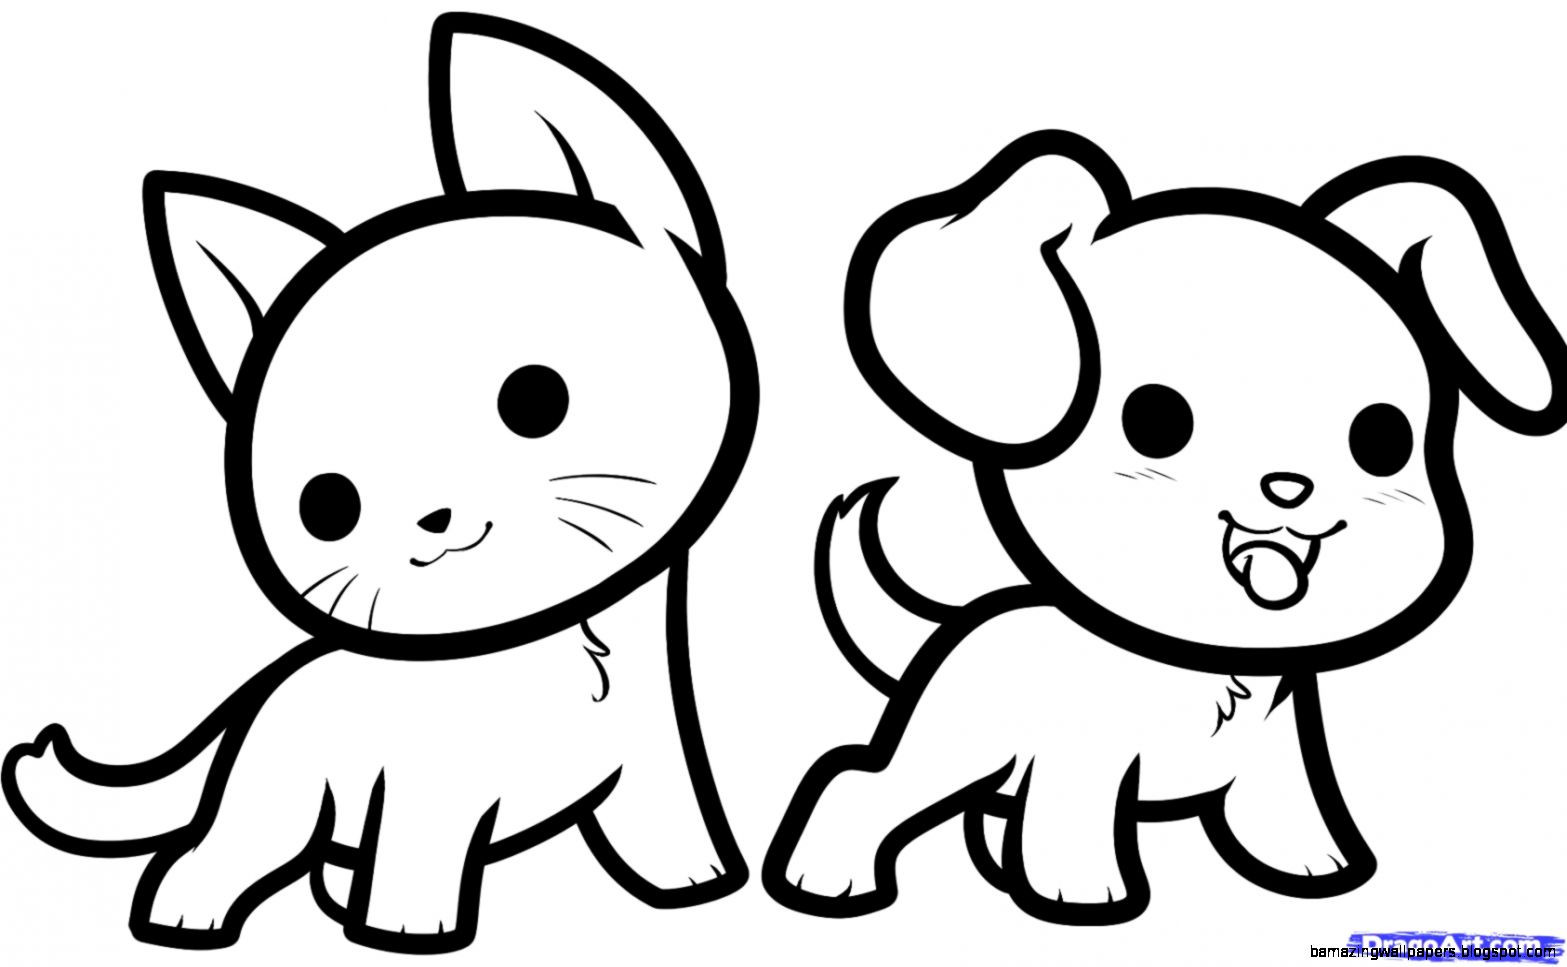 Cute Animal Coloring Pages For Kids
 Cute Animal Drawings For Kids